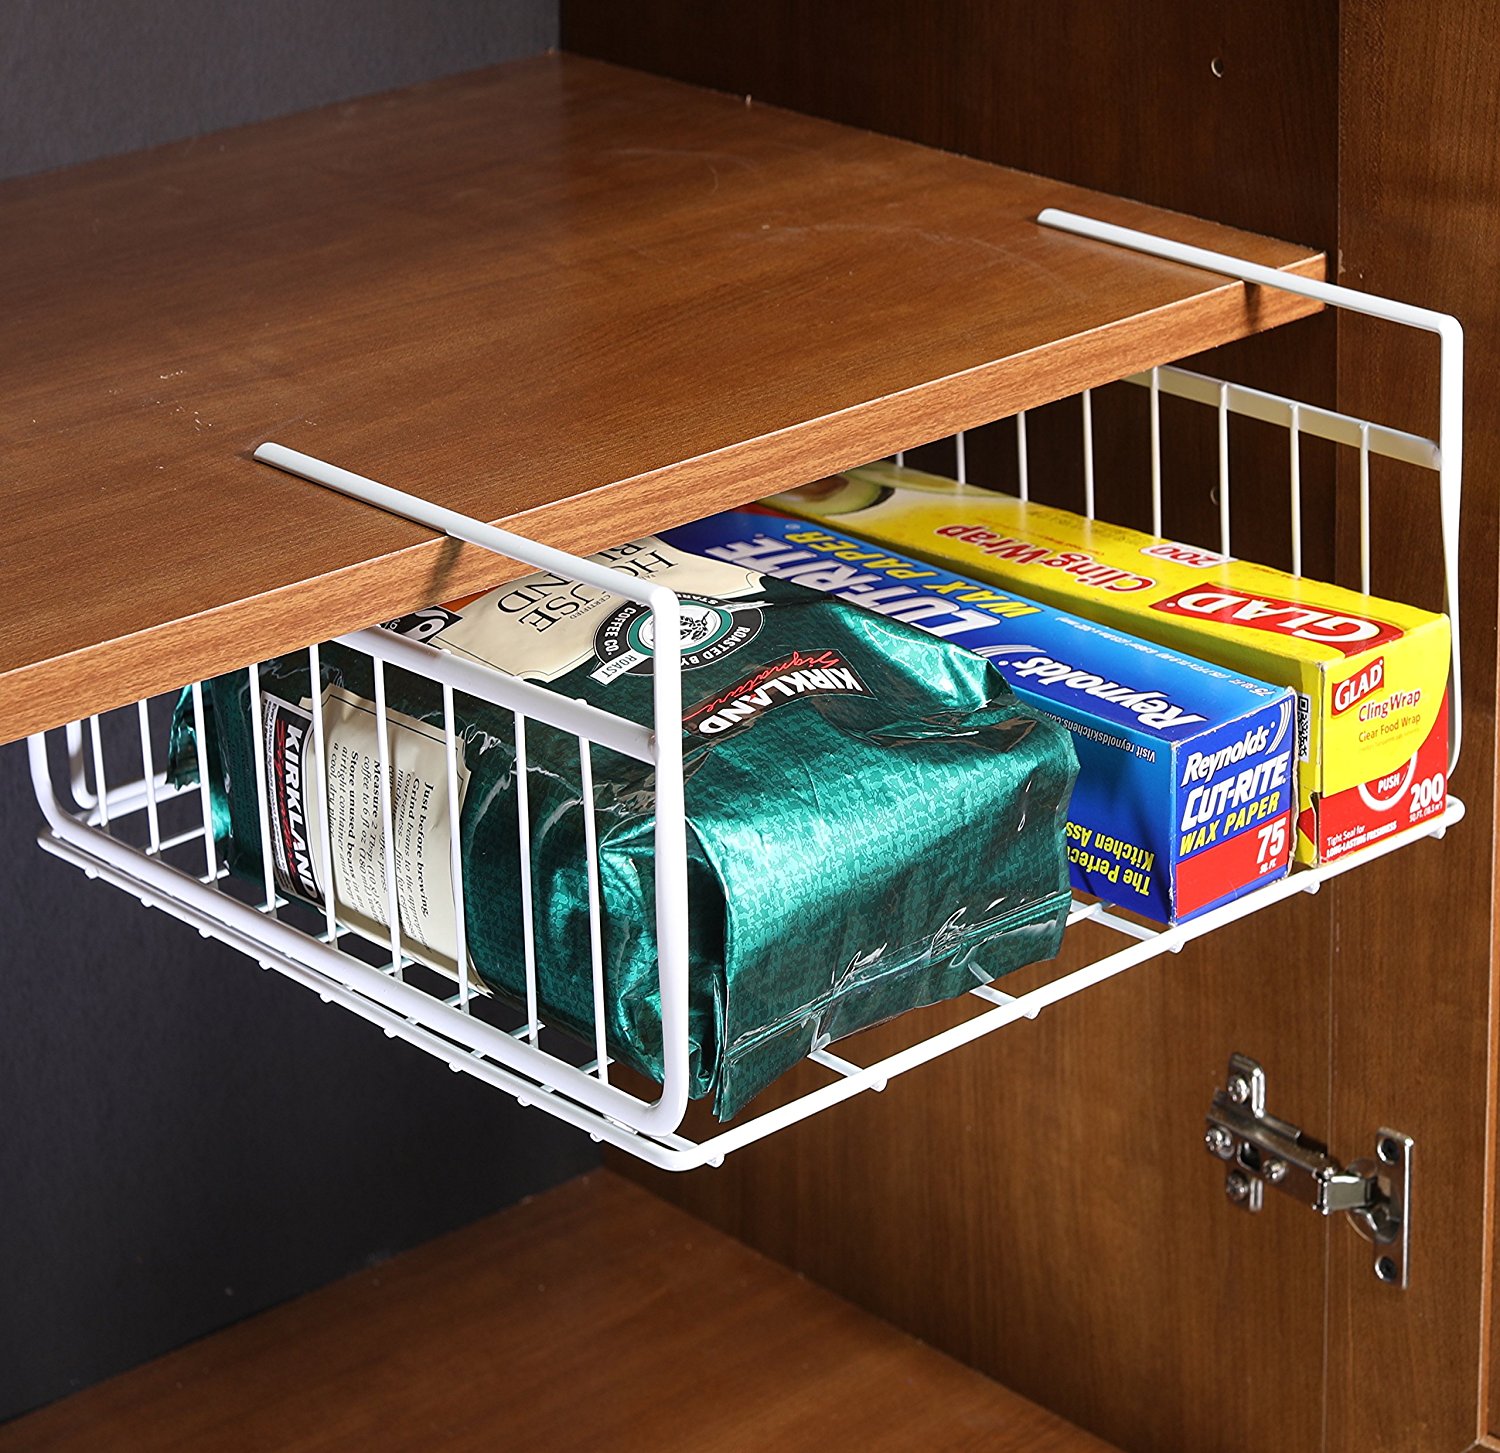 10 Things From Amazon That’ll Seriously Organize Your Kitchen